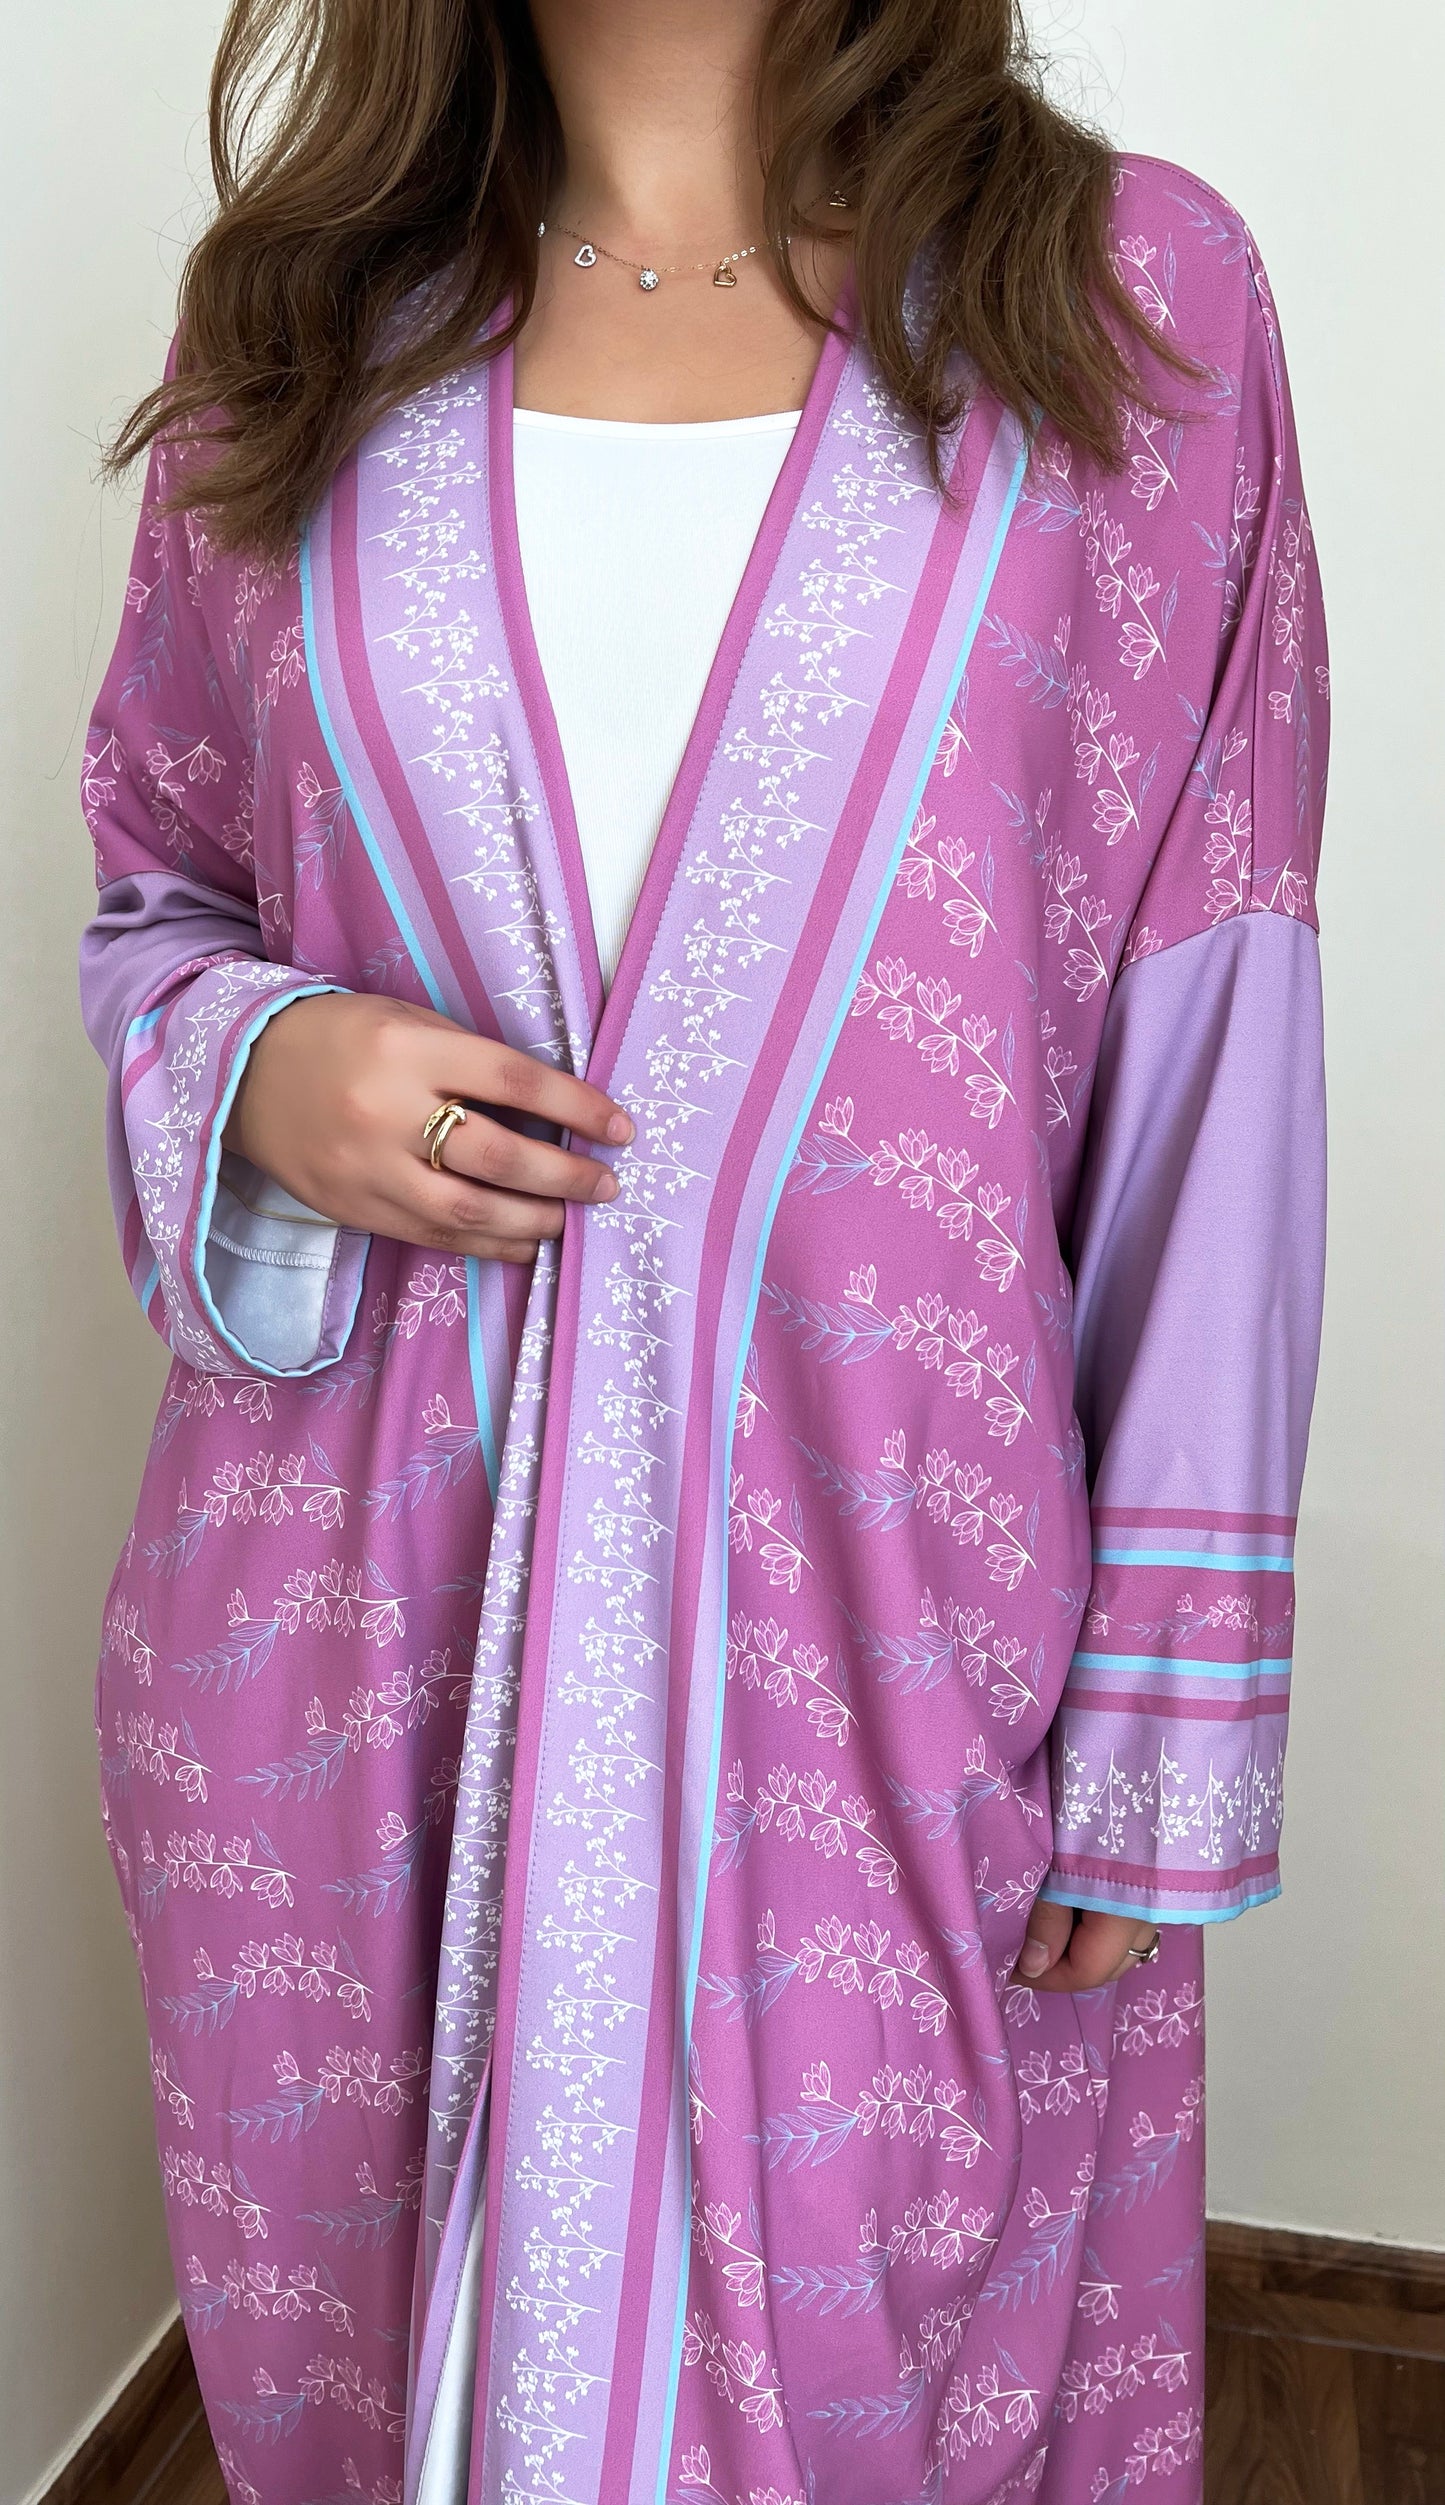 Load image into Gallery viewer, The Muse - Comfy TUP printed Kimono - Online Shopping - The Untitled Project
